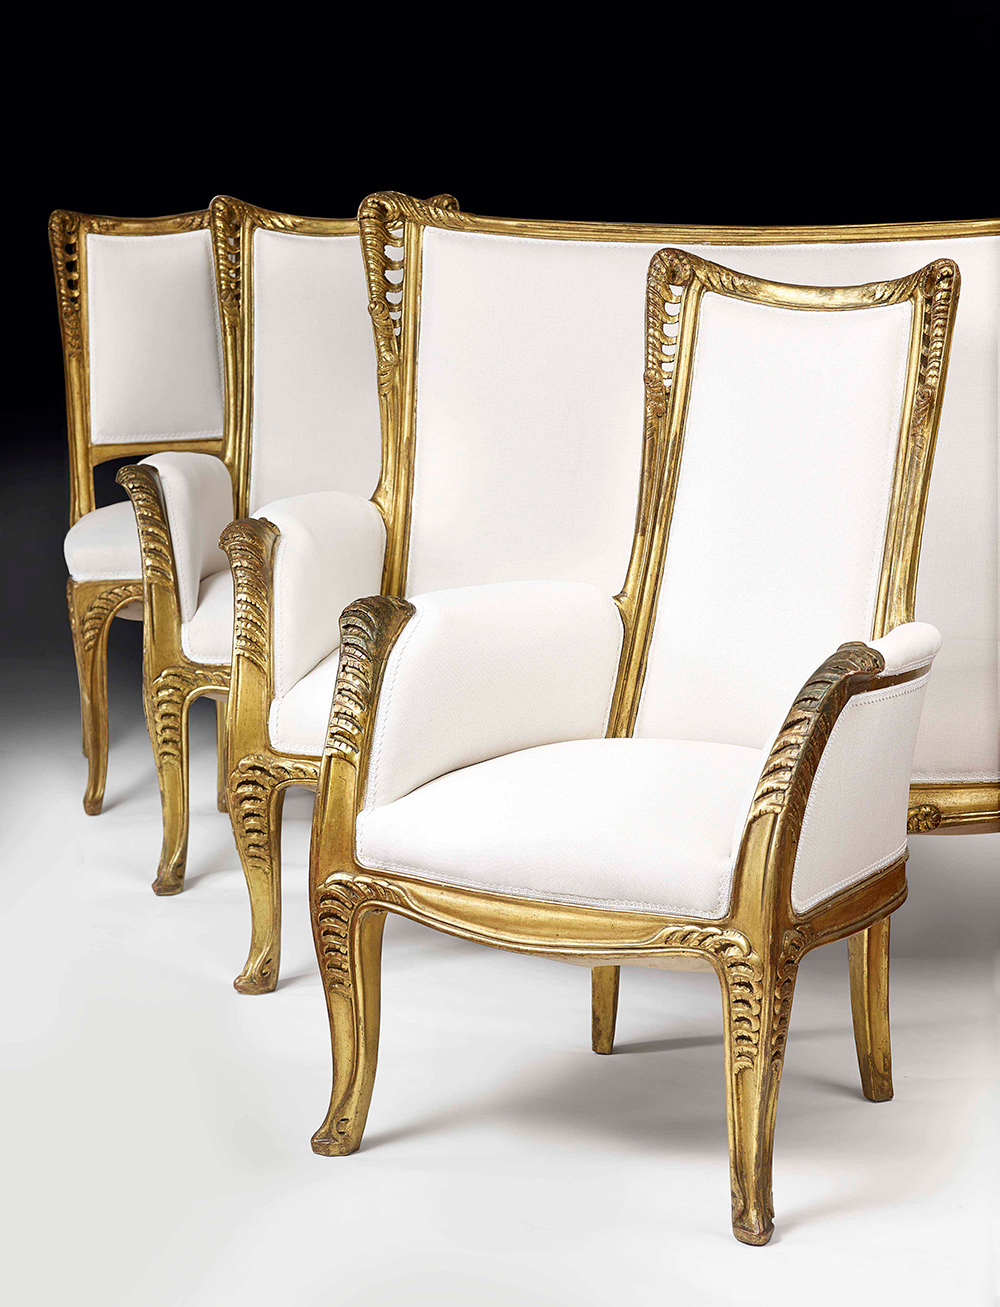 Стулья поздний Модерн. A Fine and rare Set comprising two Armchairs and two Chairs in Carved and Gilded Wood. Ombellifere. Two armchairs